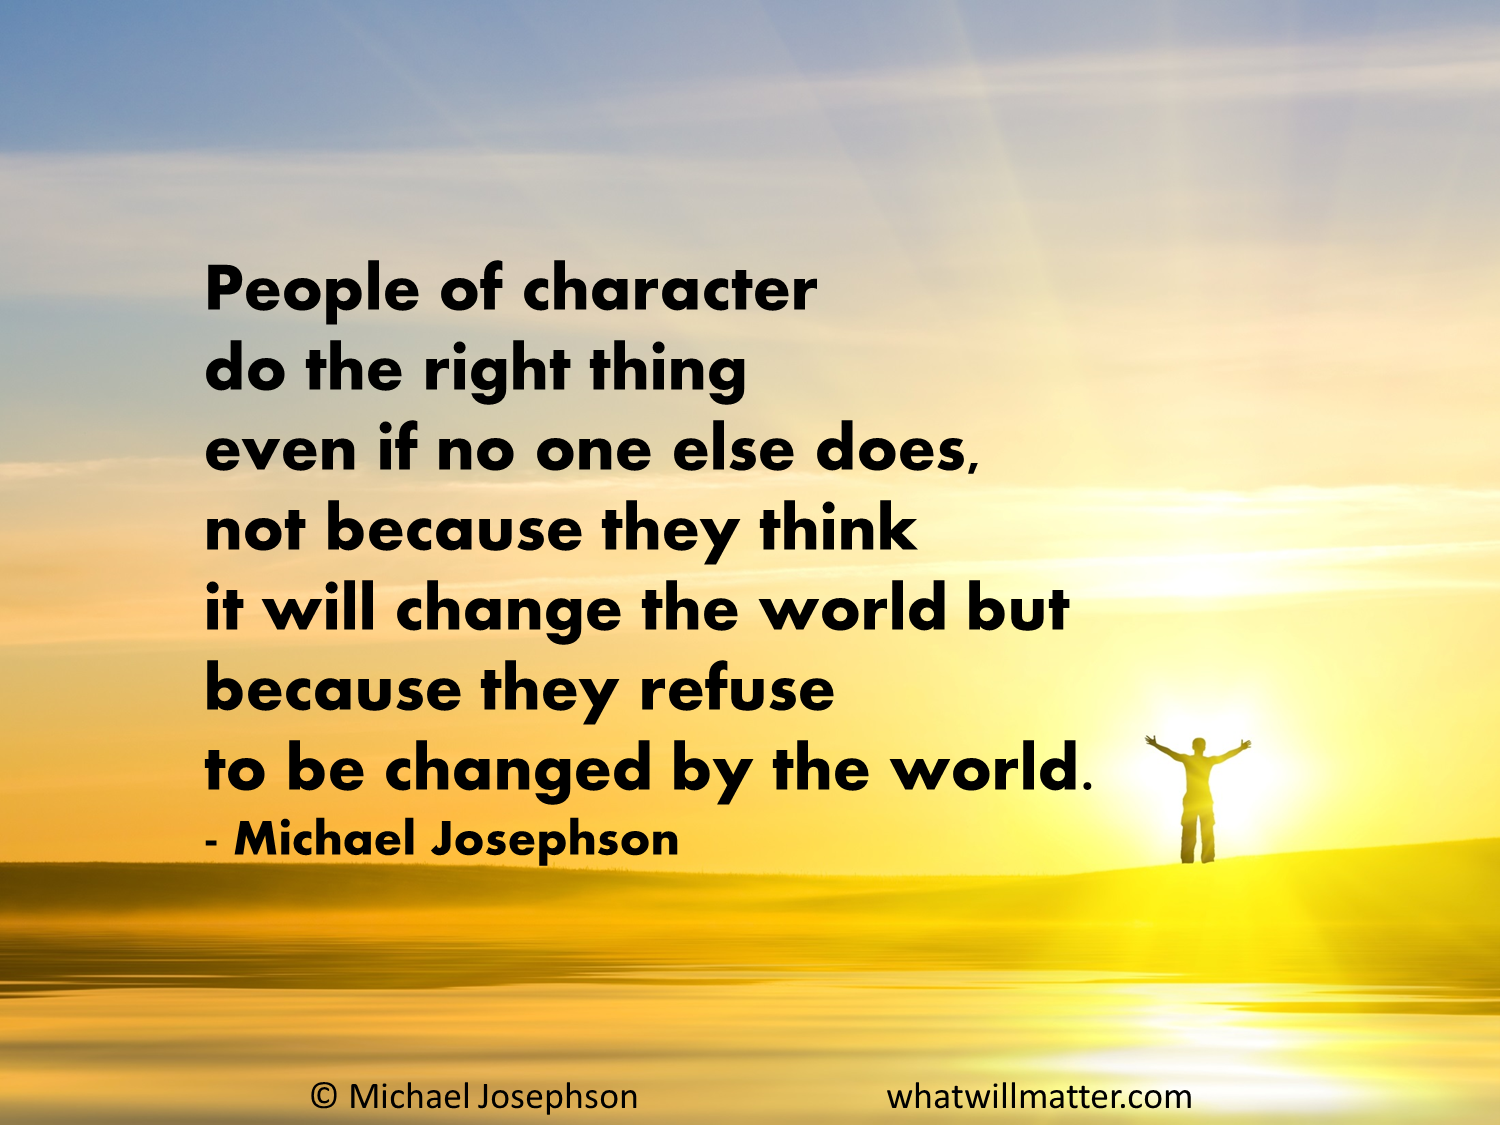 People of character do the right thing even if no one else does, not because they think it will change the world but because they refuse to be changed ... Michael Josephson